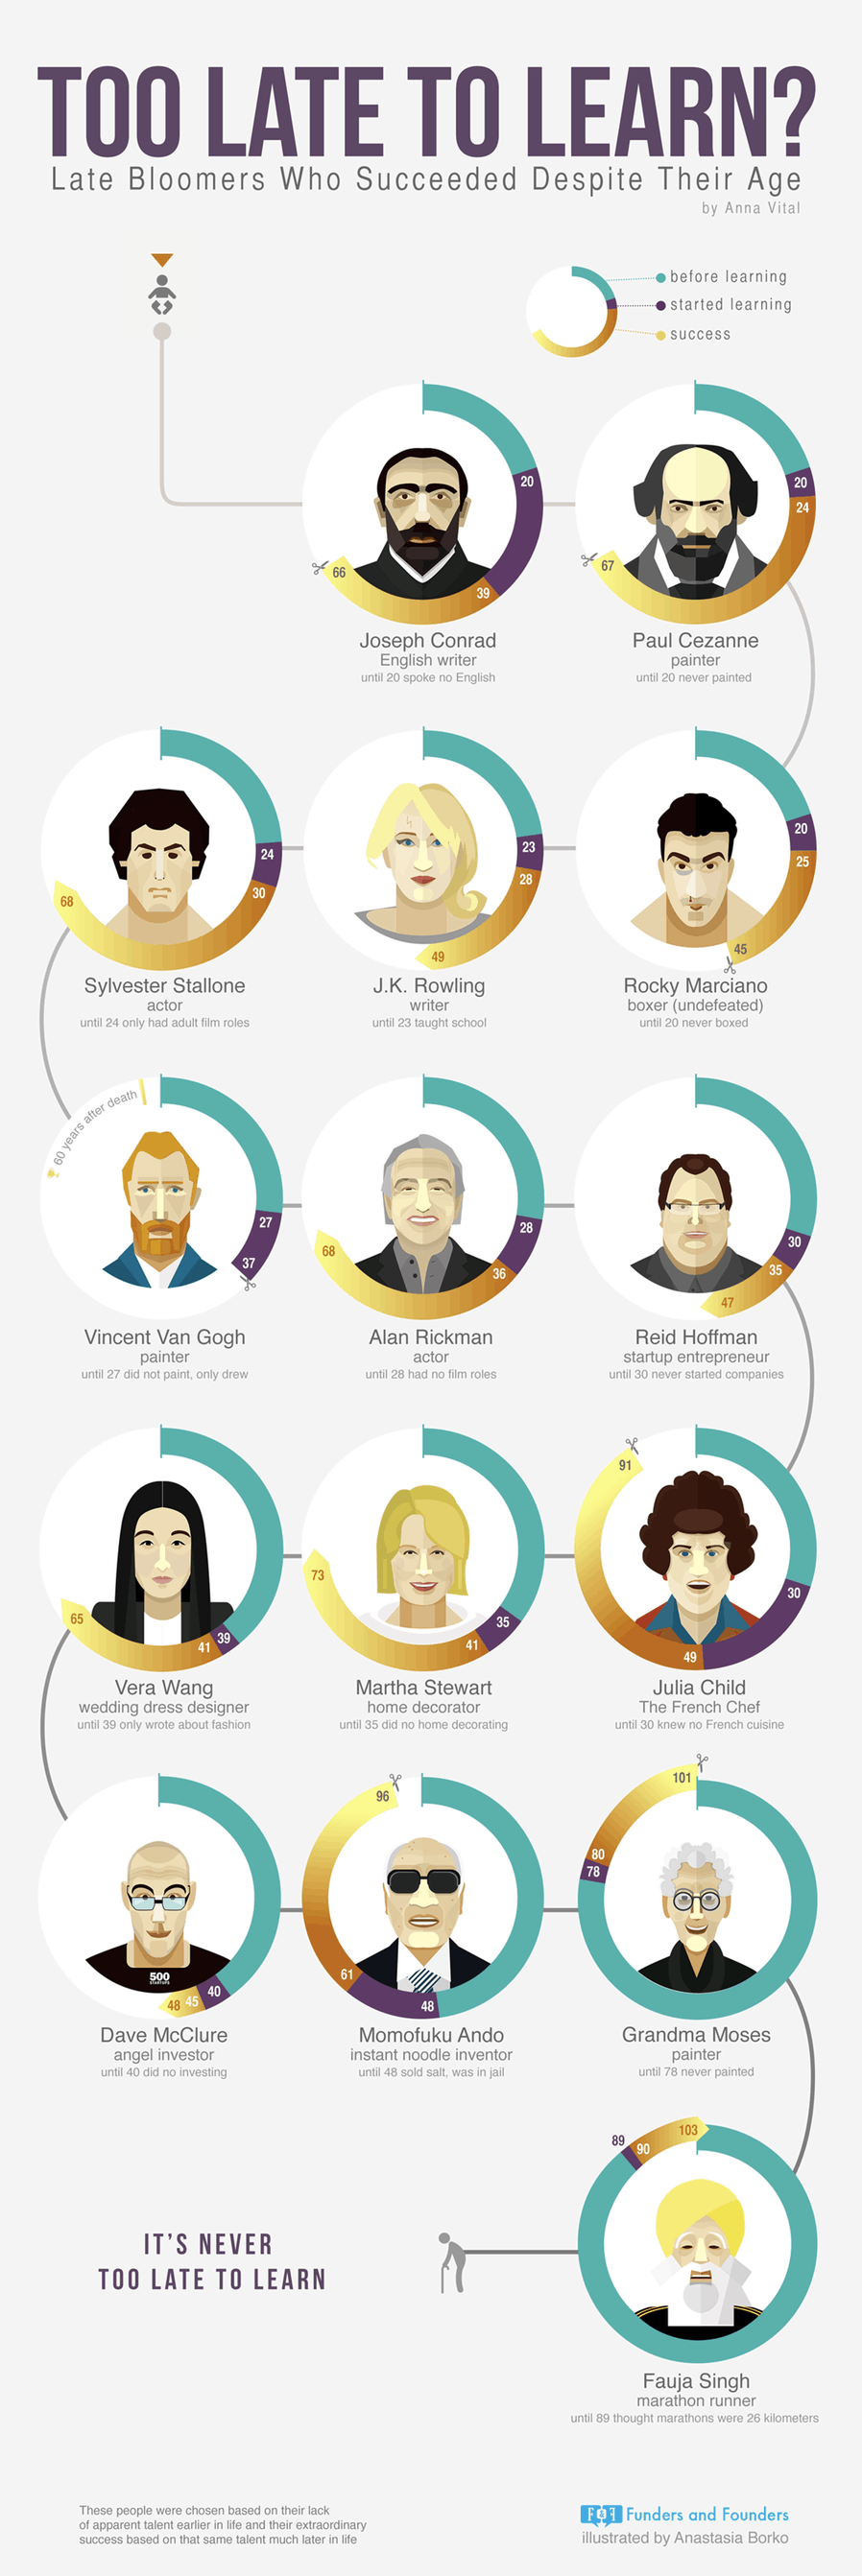 too-late-to-learn-late-bloomers-people-who-succeeded-infographic